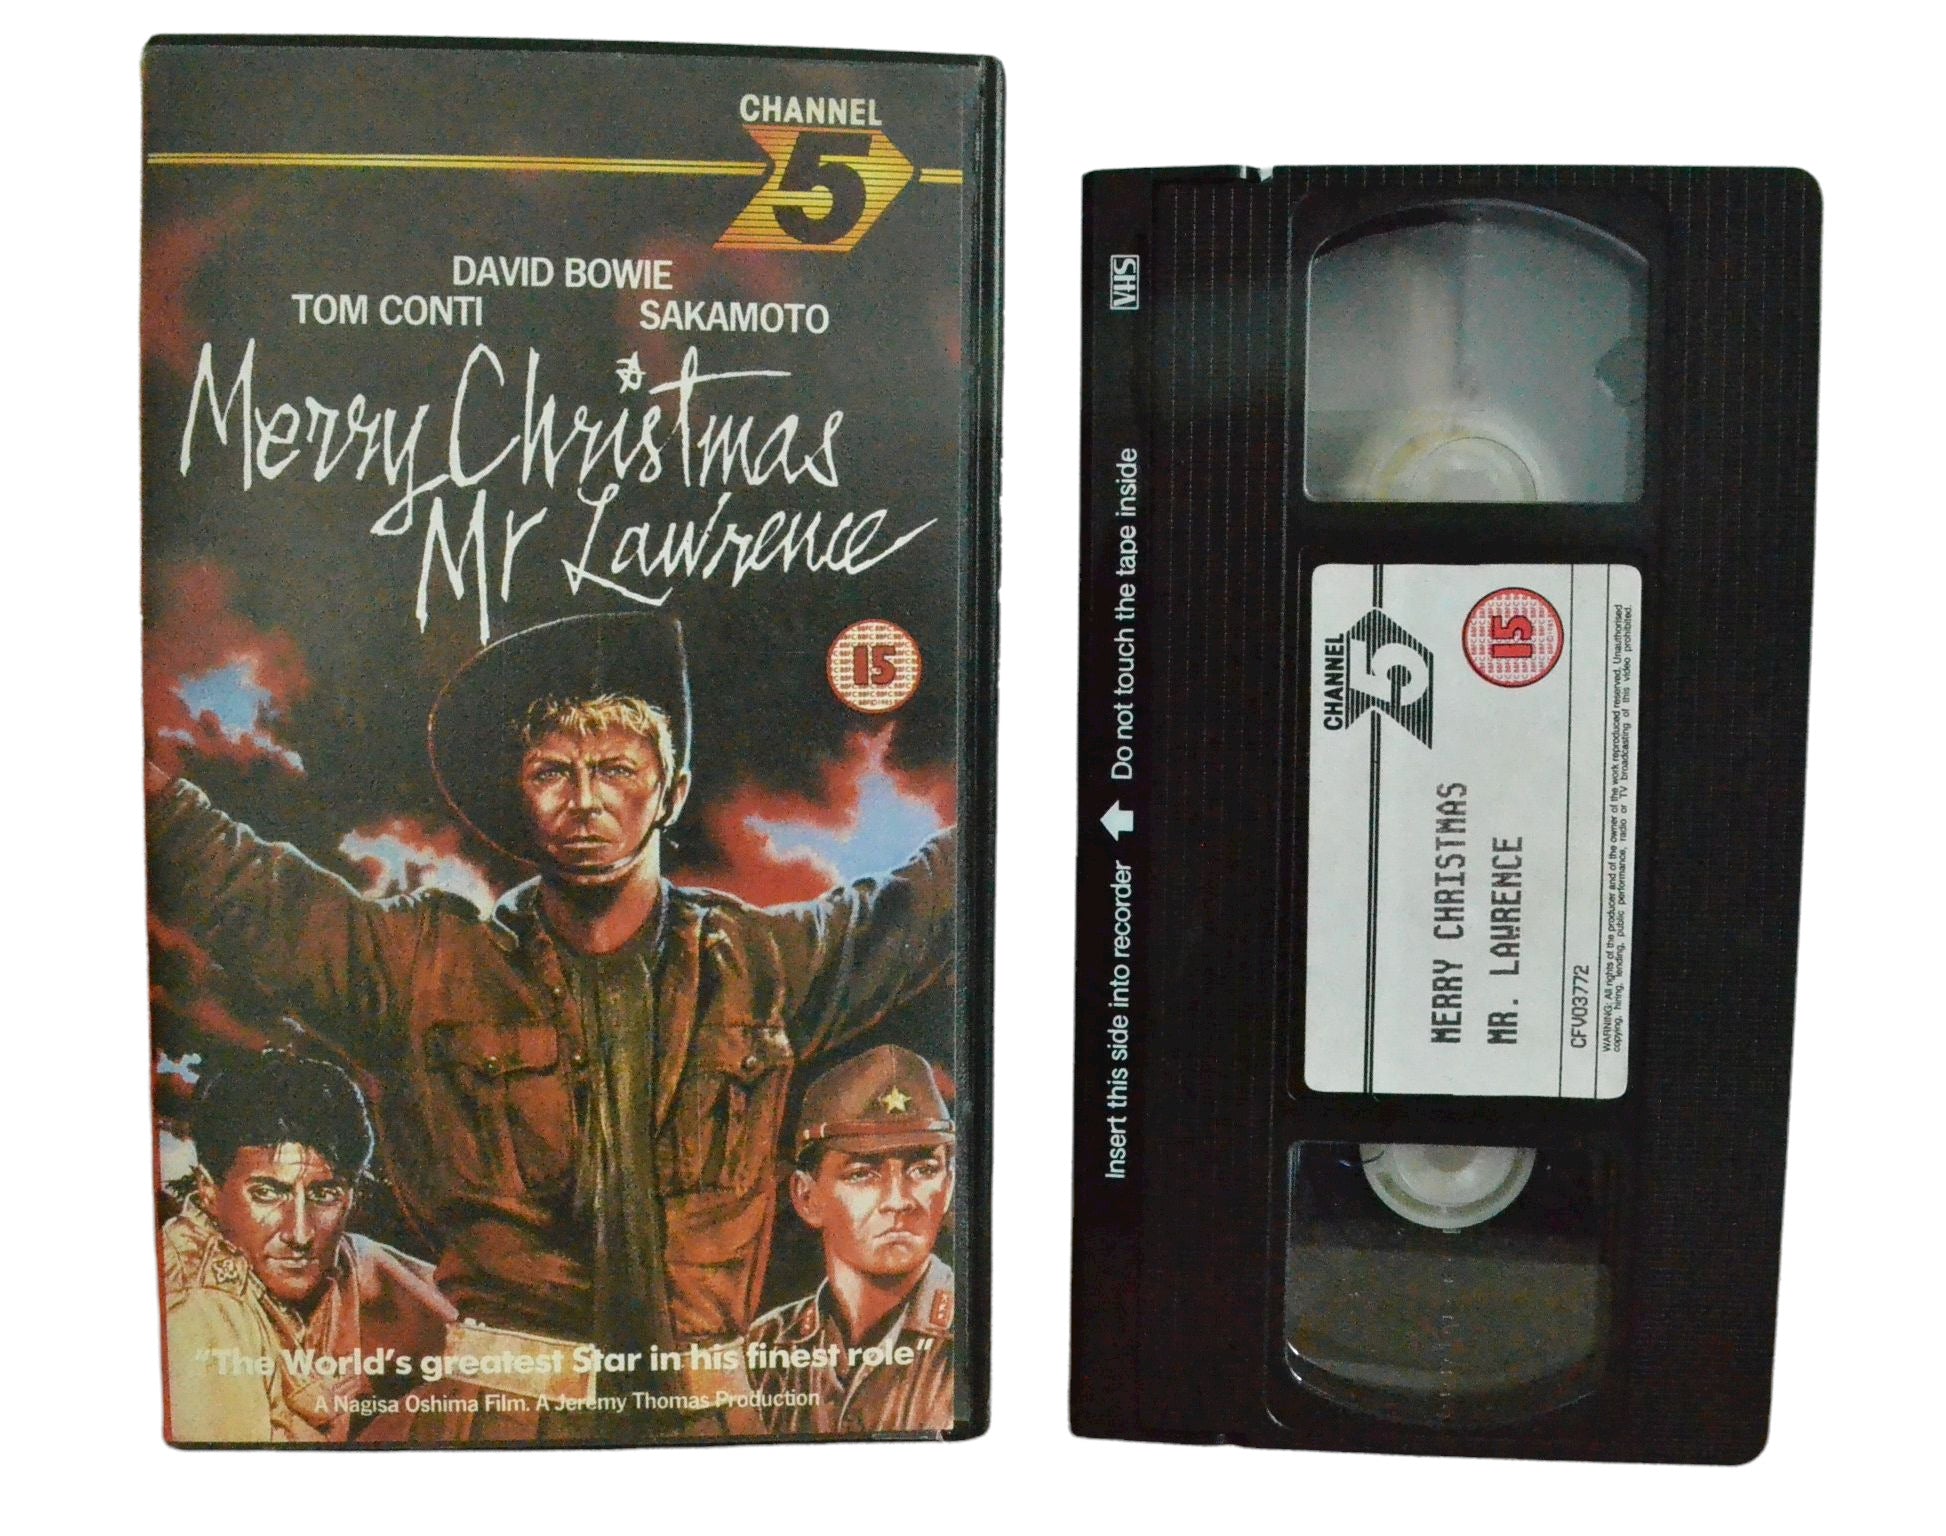 Merry Christmas Mr Lawrence - Tom Conti - Channel 5 - Vintage - Pal VHS-